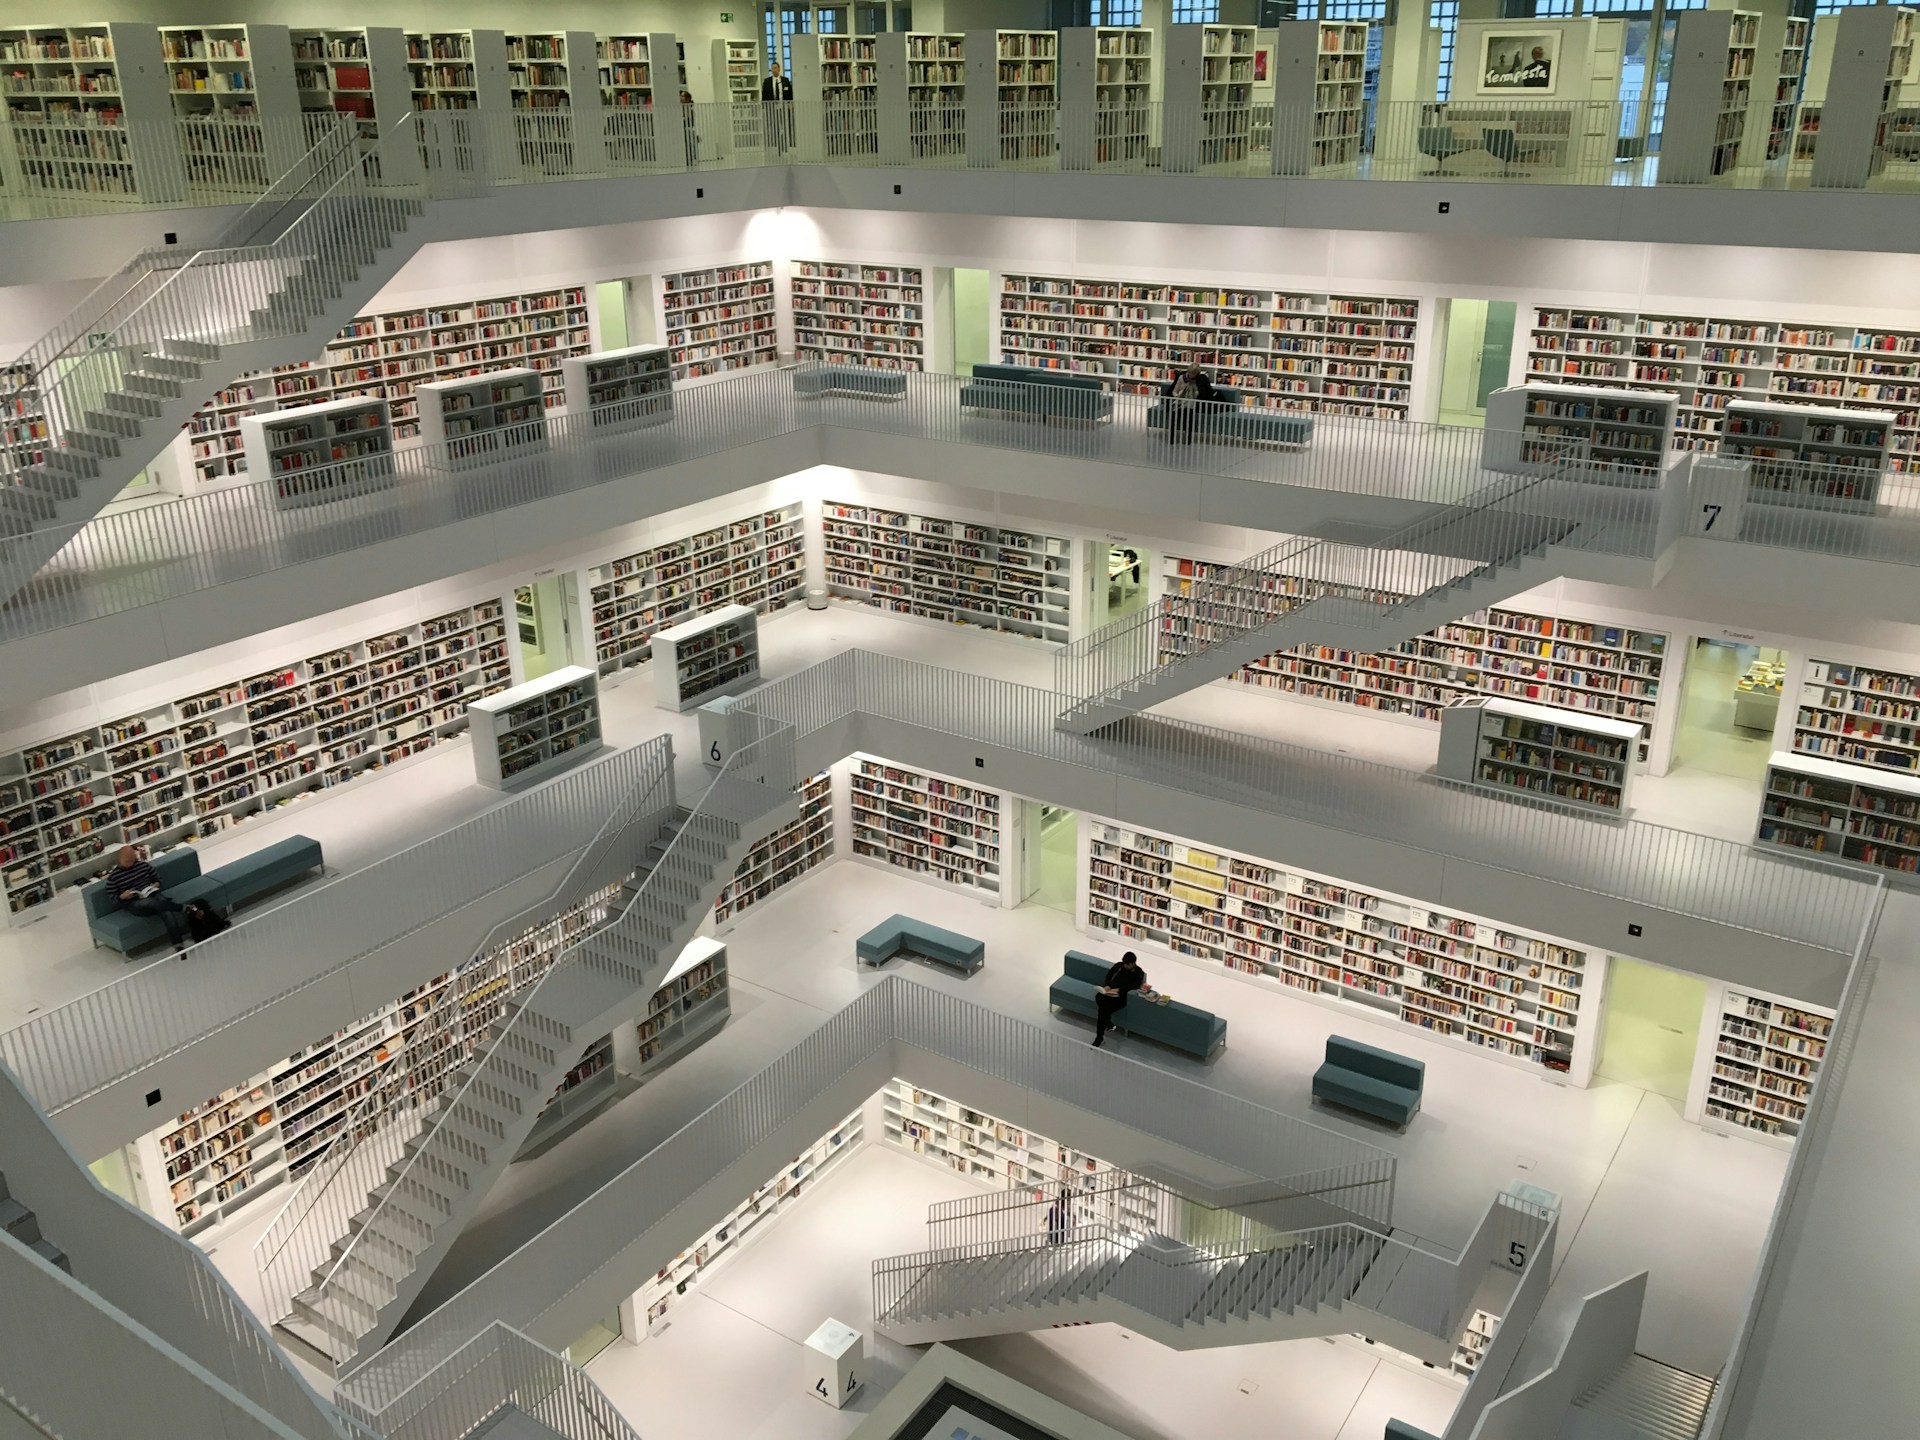 Huge modern library filled with books